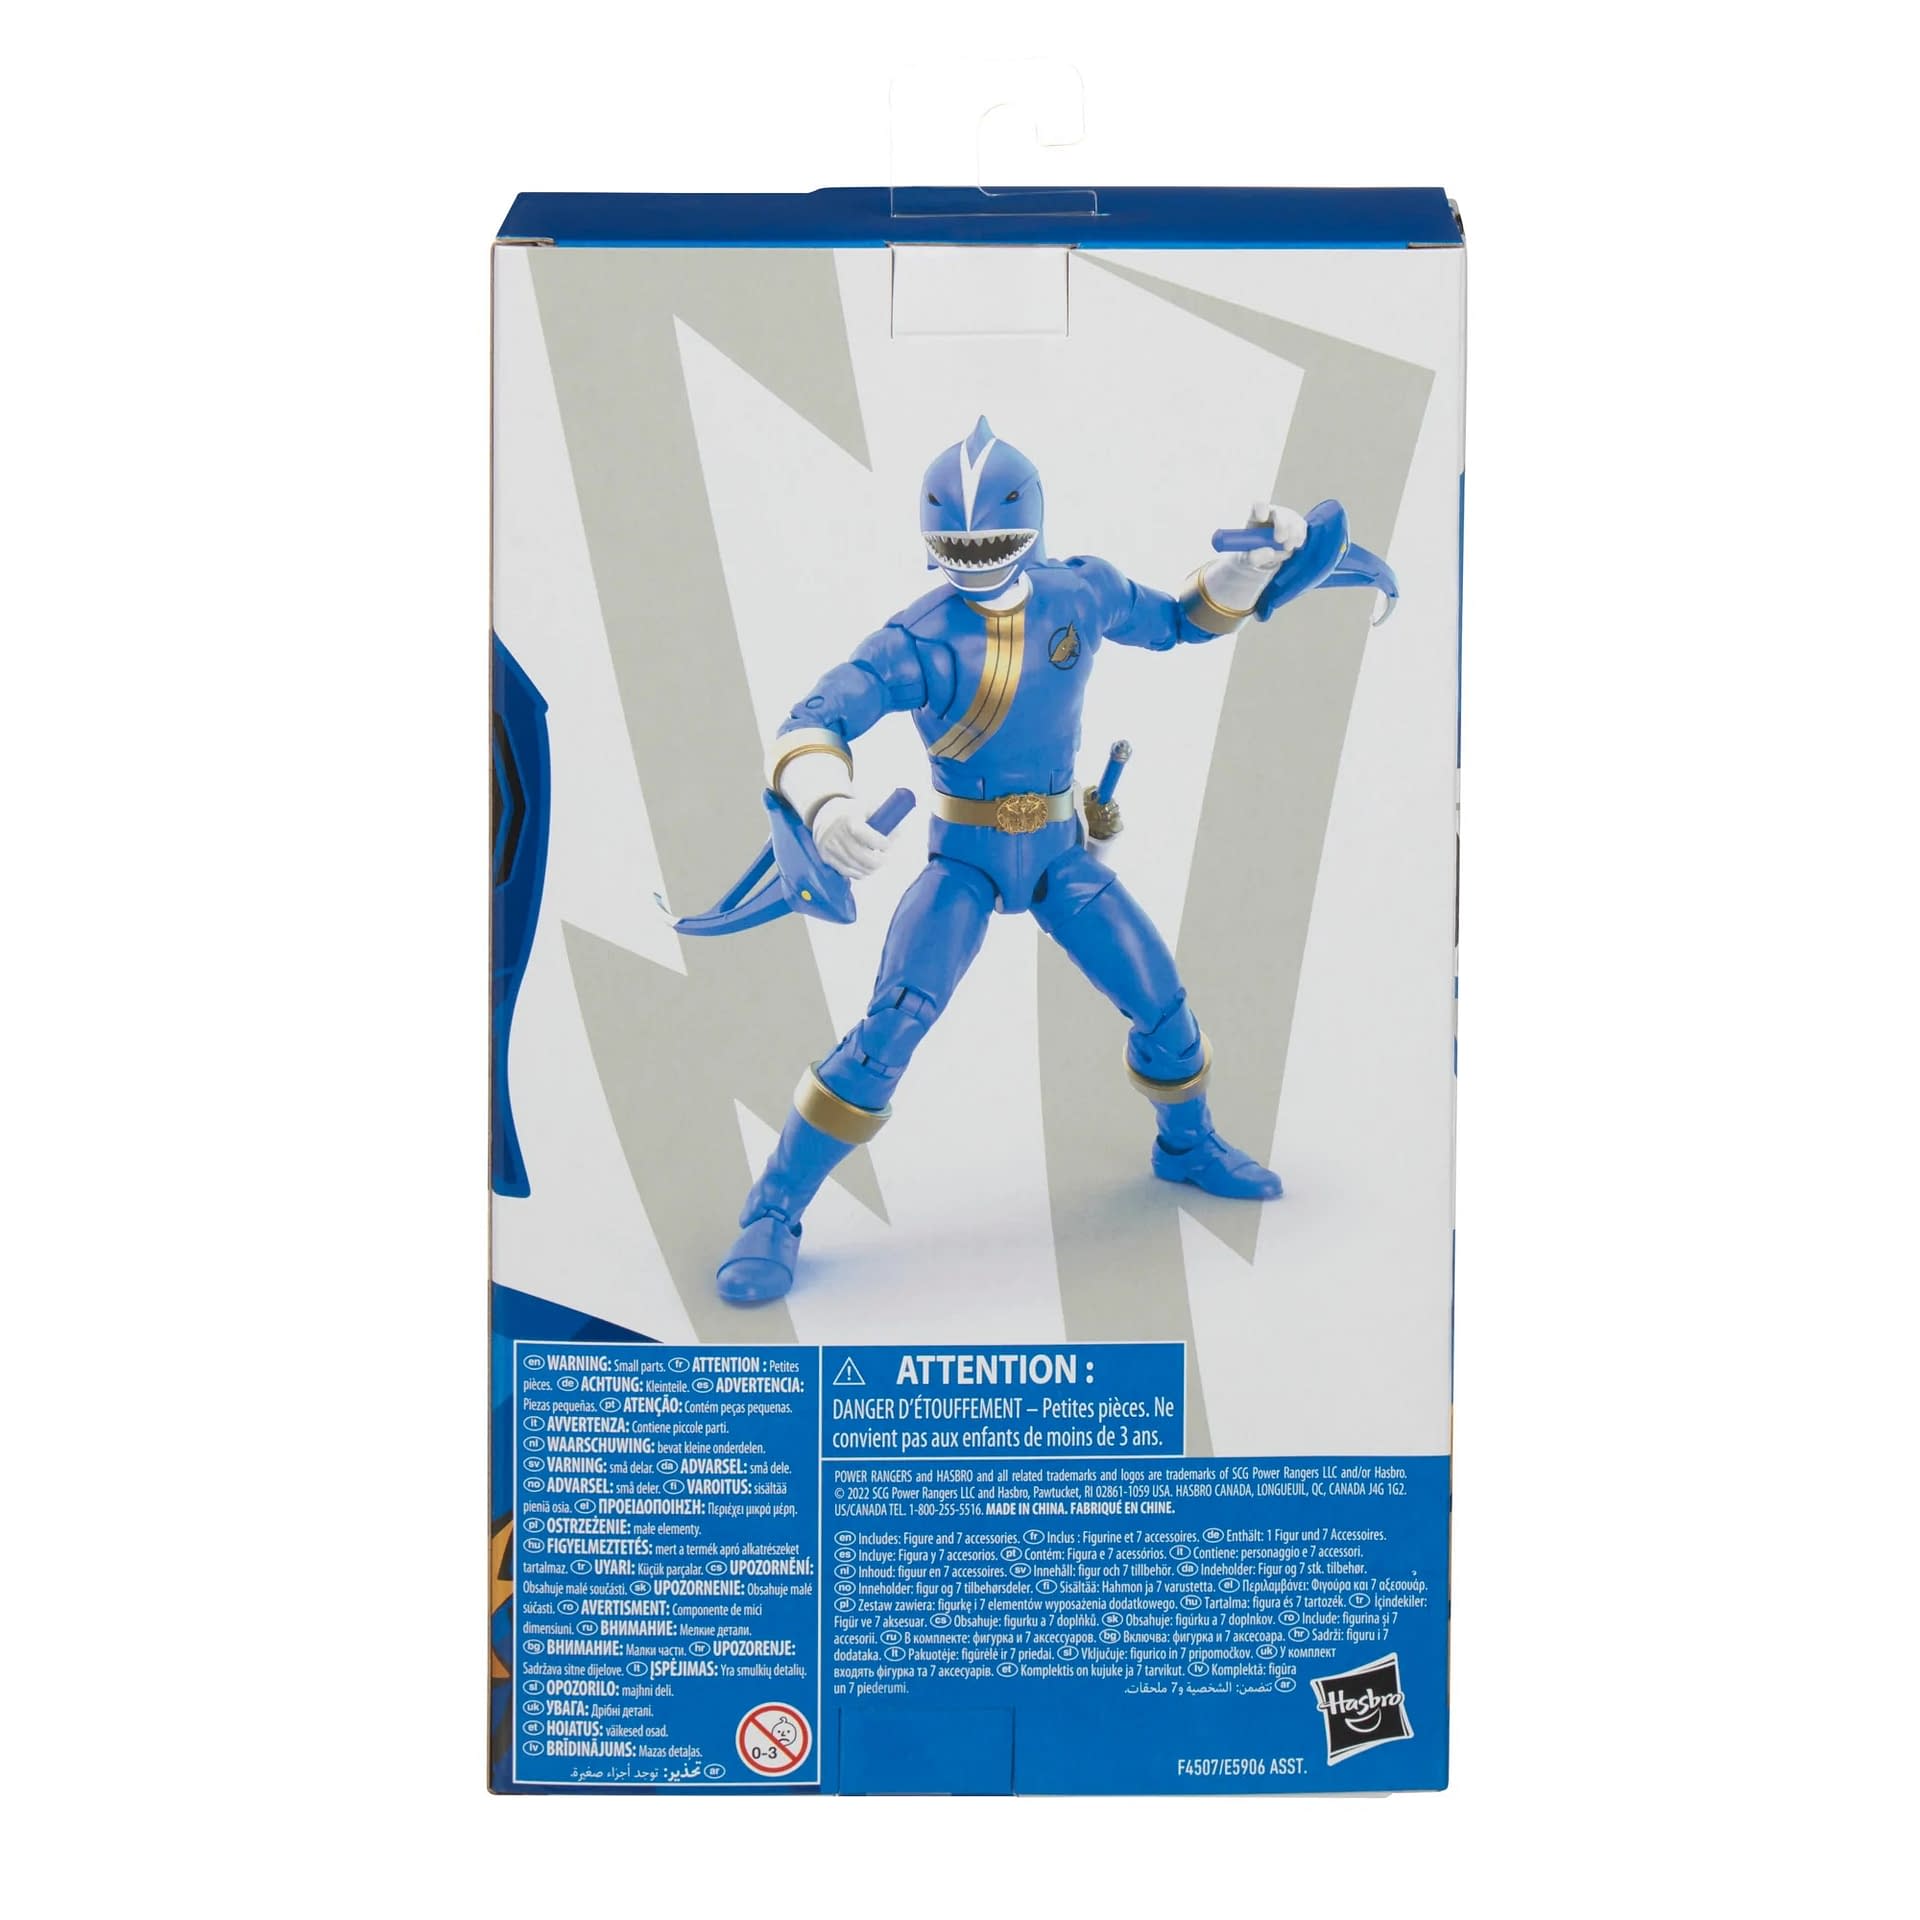 Hasbro Debuts New Power Rangers Figure with Blue Wild Force Ranger